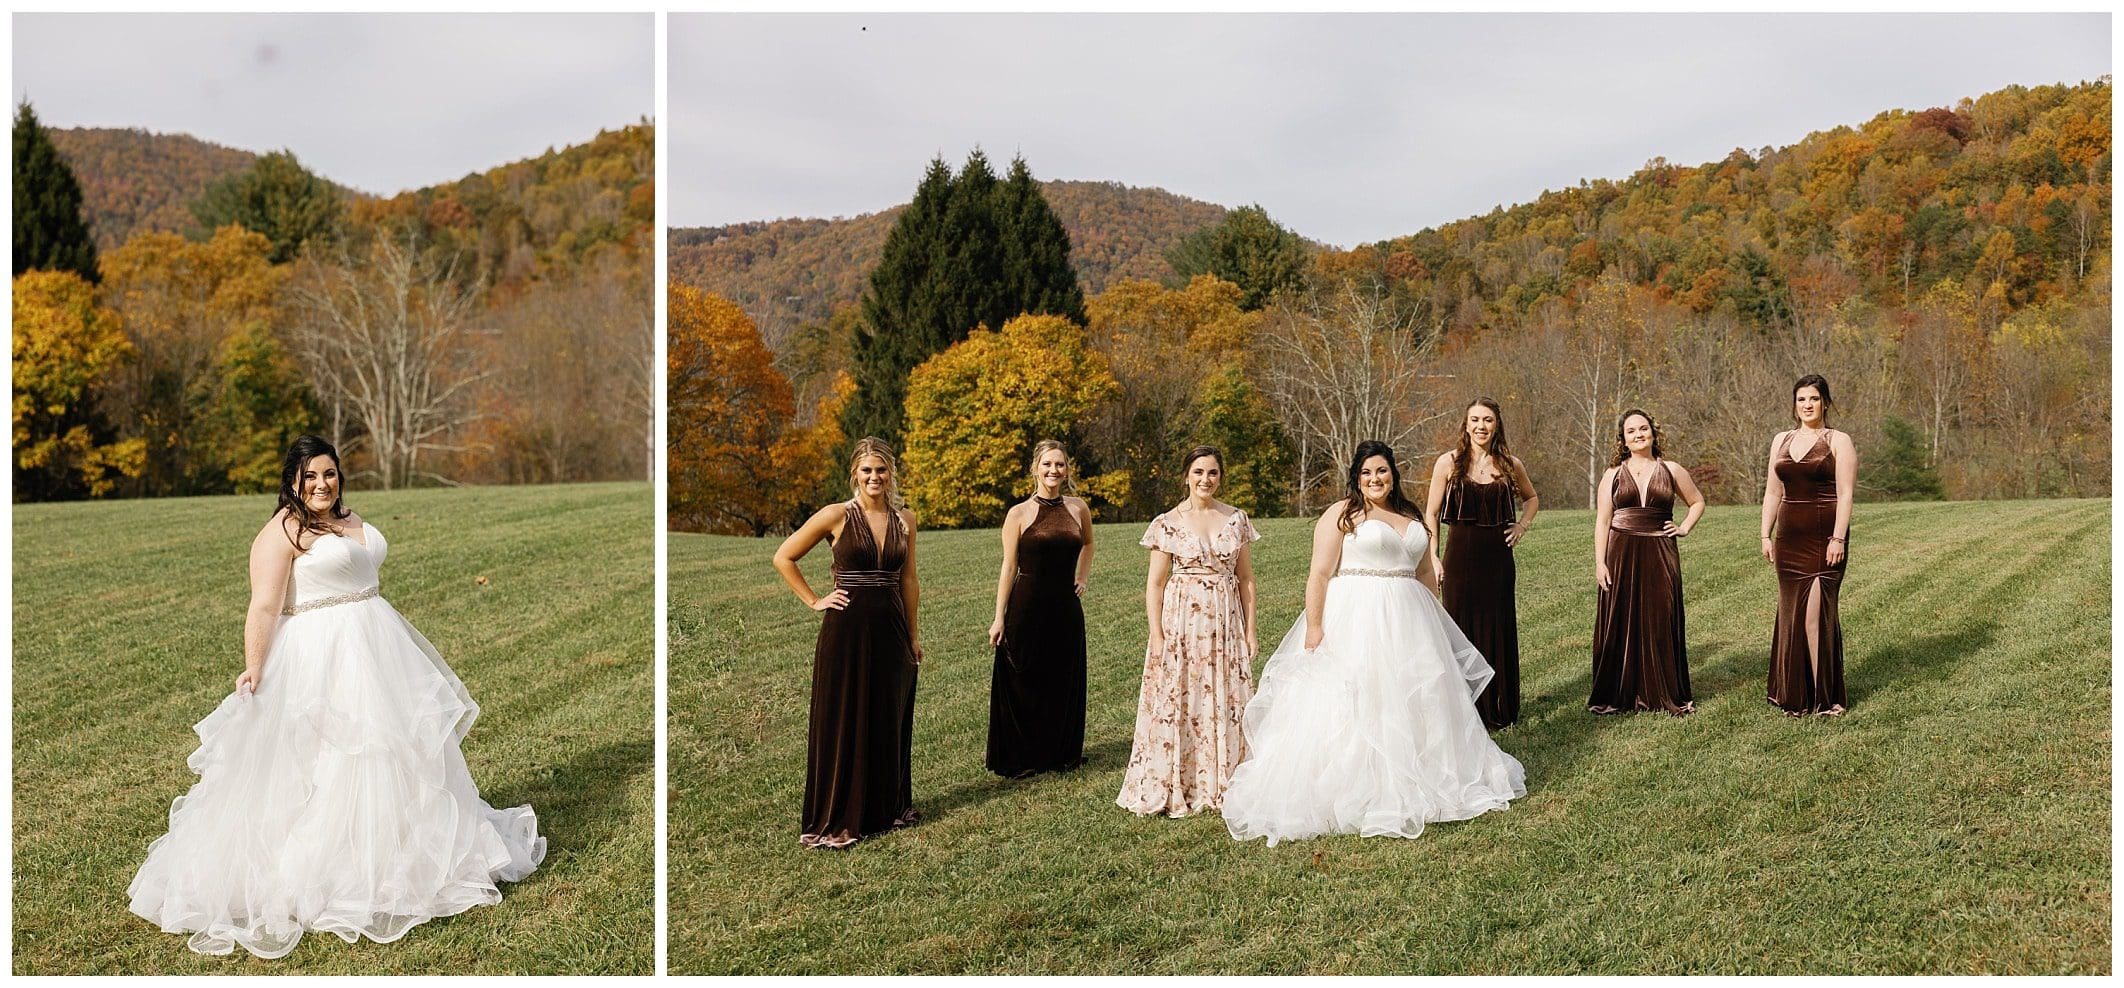 bride and bridesmaids posing outdoors with fall leaves for a November wedding